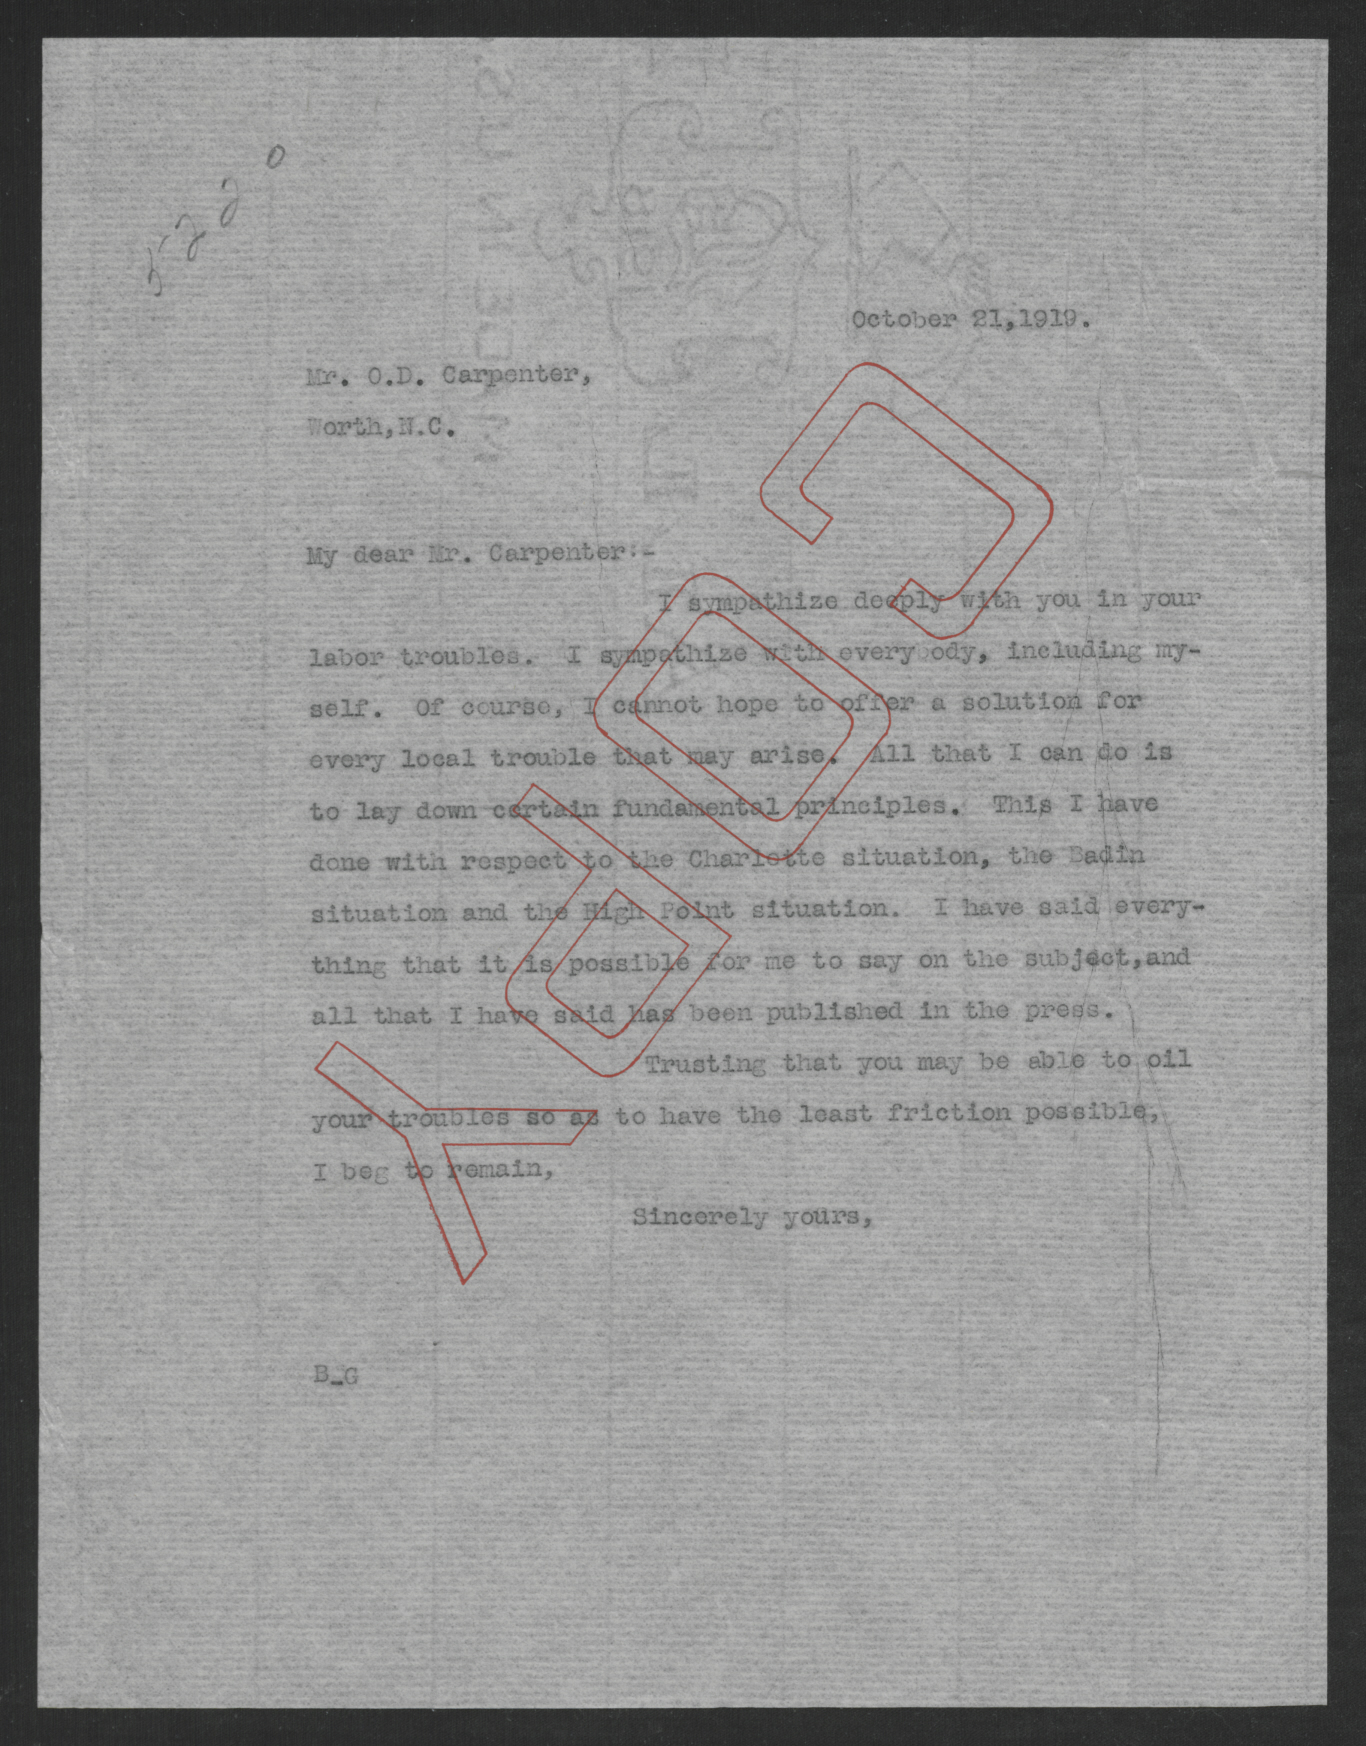 Letter from Thomas W. Bickett to Oscar D. Carpenter, October 21, 1919